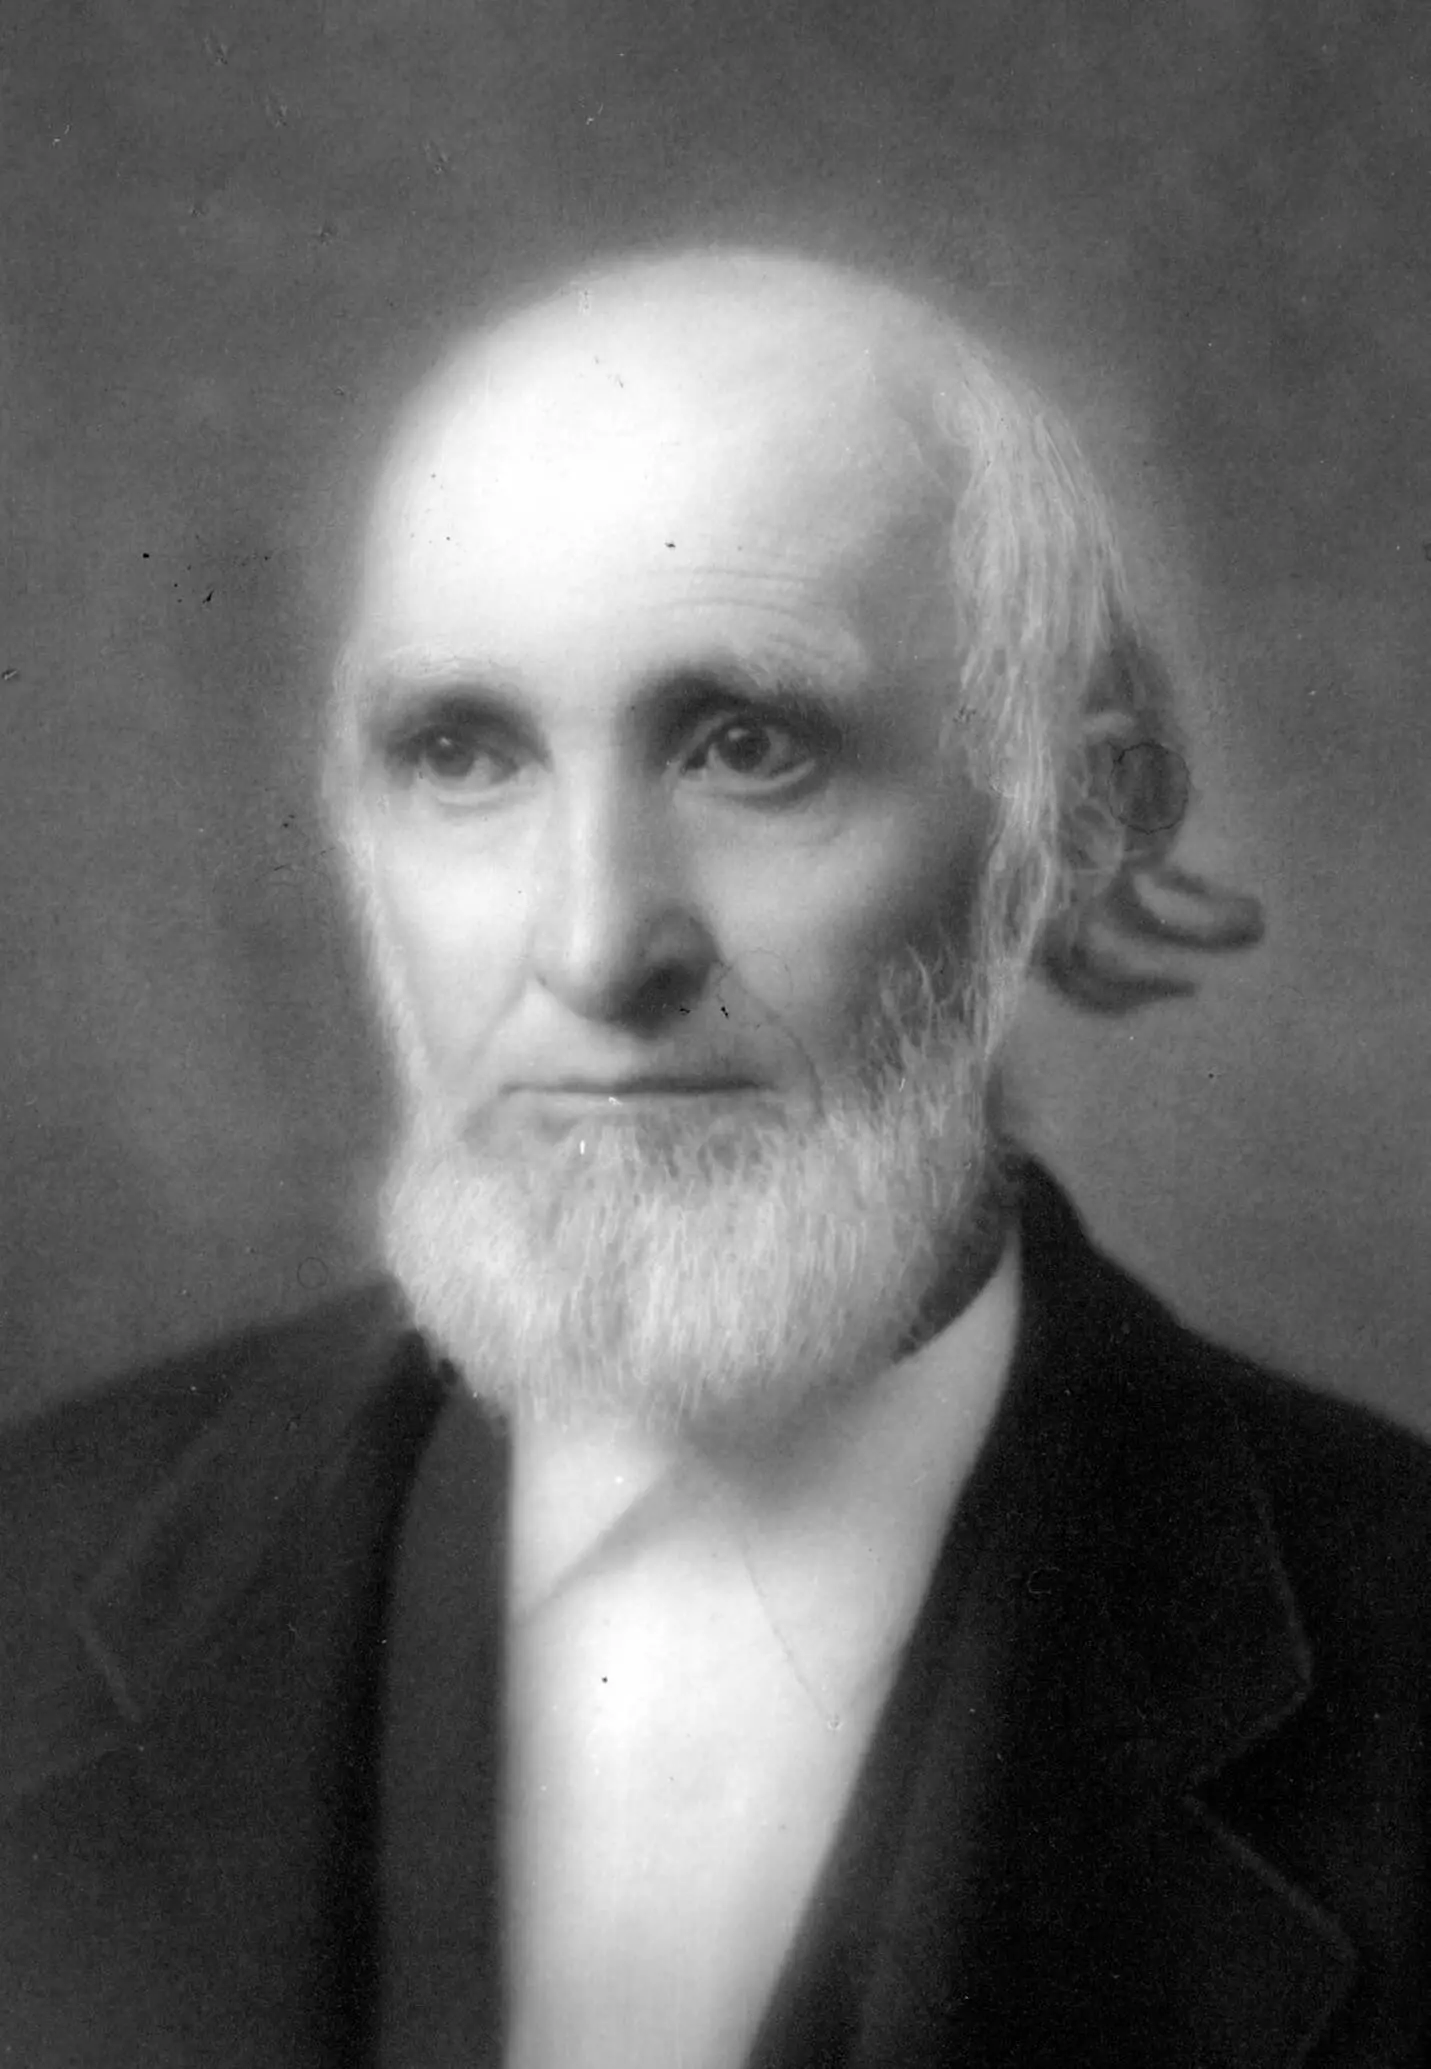 A portrait of a white man with a short white beard wearing a dark coat and a white shirt.